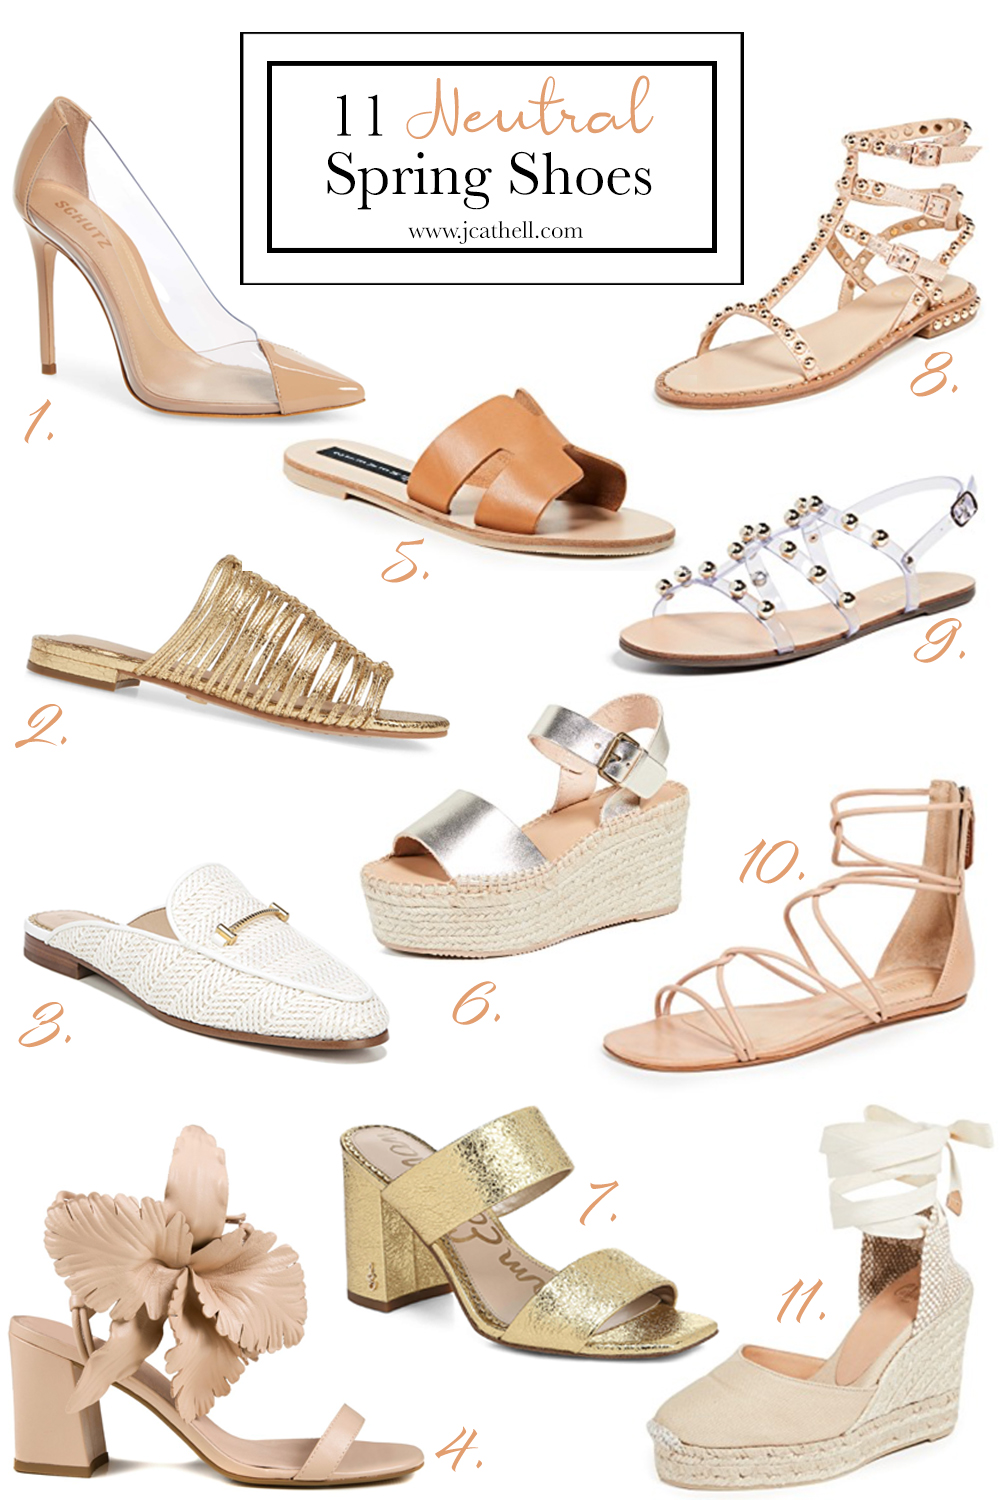 11 NEUTRAL SPRING SHOES